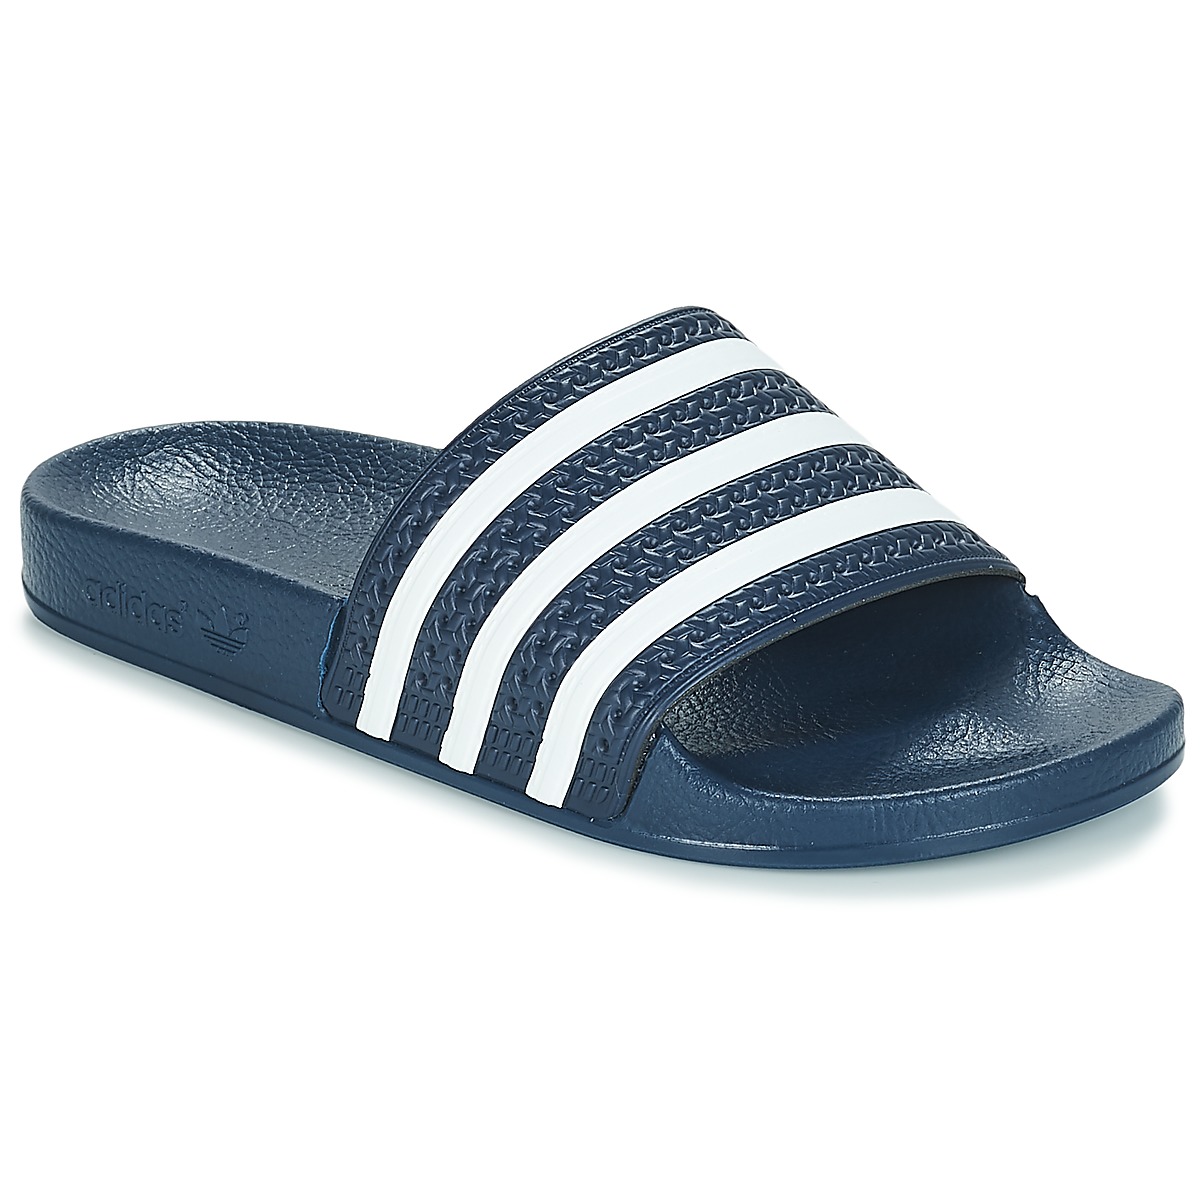 adidas Originals ADILETTE Marine / White - Fast delivery | Spartoo Europe !  - Shoes Sliders 35,00 €